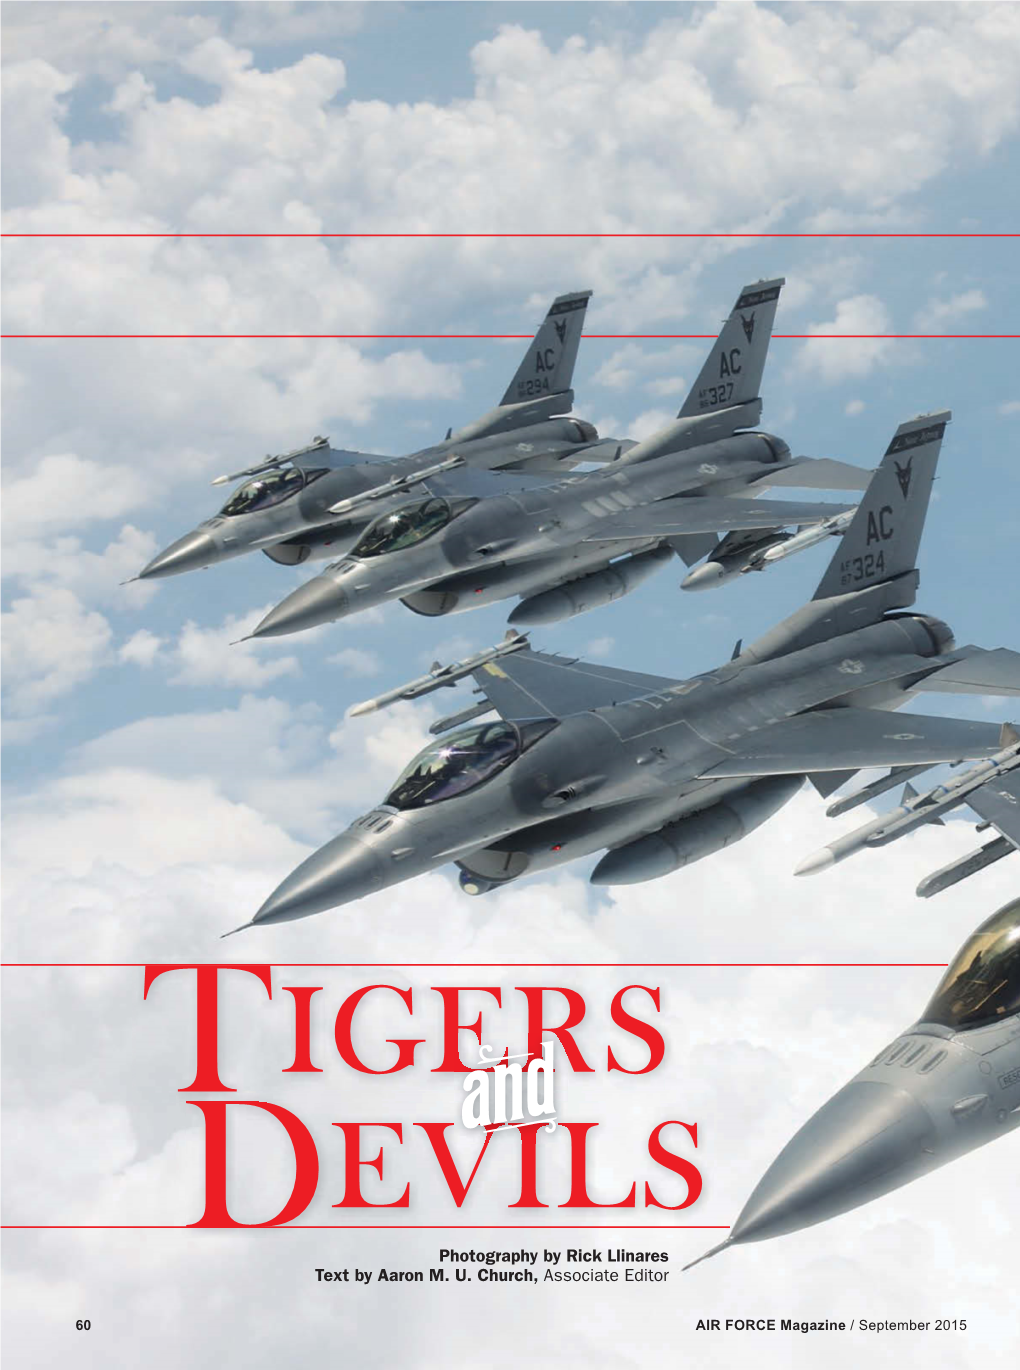 Tigers and Devils